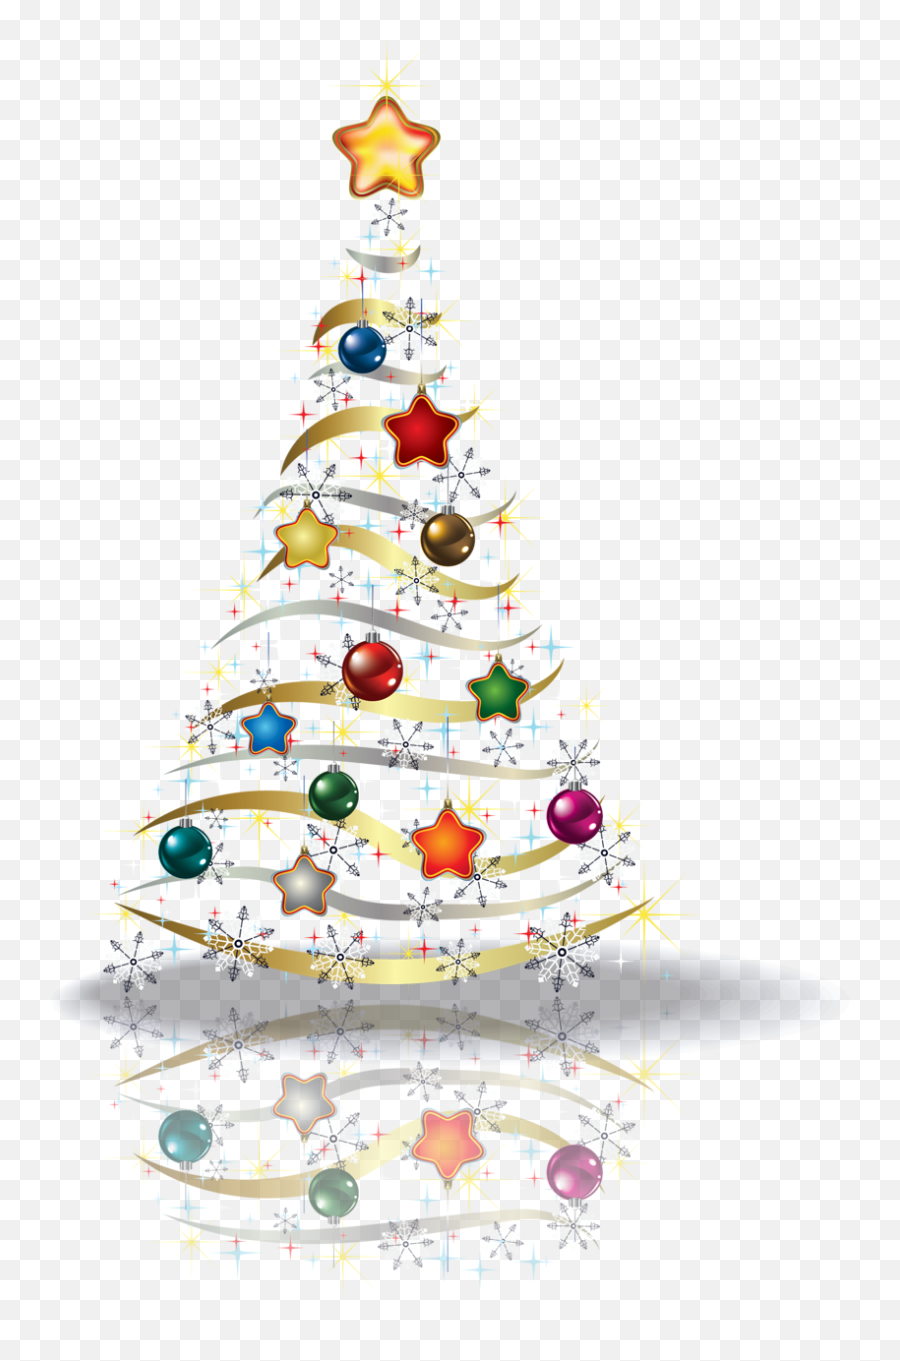 Free Download Christmas Trees Transparent Clipart Christmas Emoji,Clipart Of Christmas